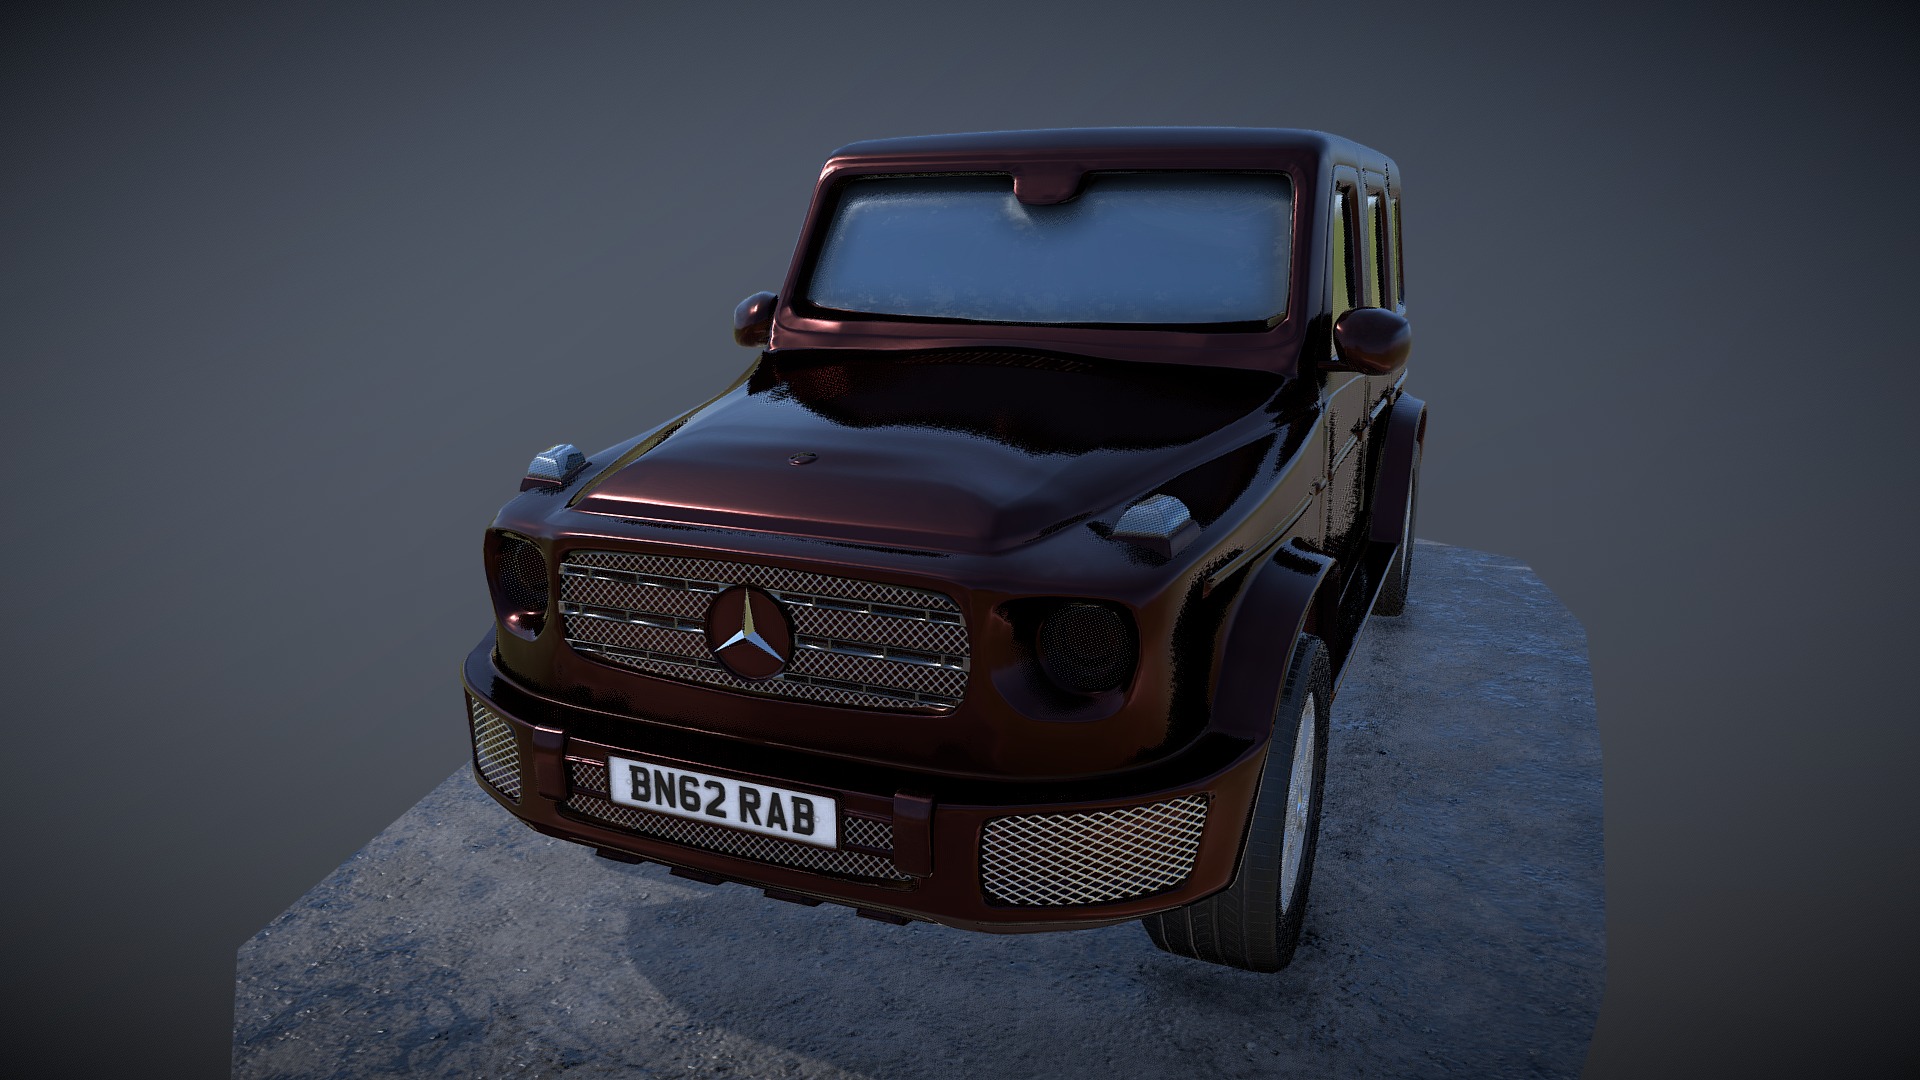 3D model Mercedes G-Class 2018 - This is a 3D model of the Mercedes G-Class 2018. The 3D model is about a car parked on pavement.